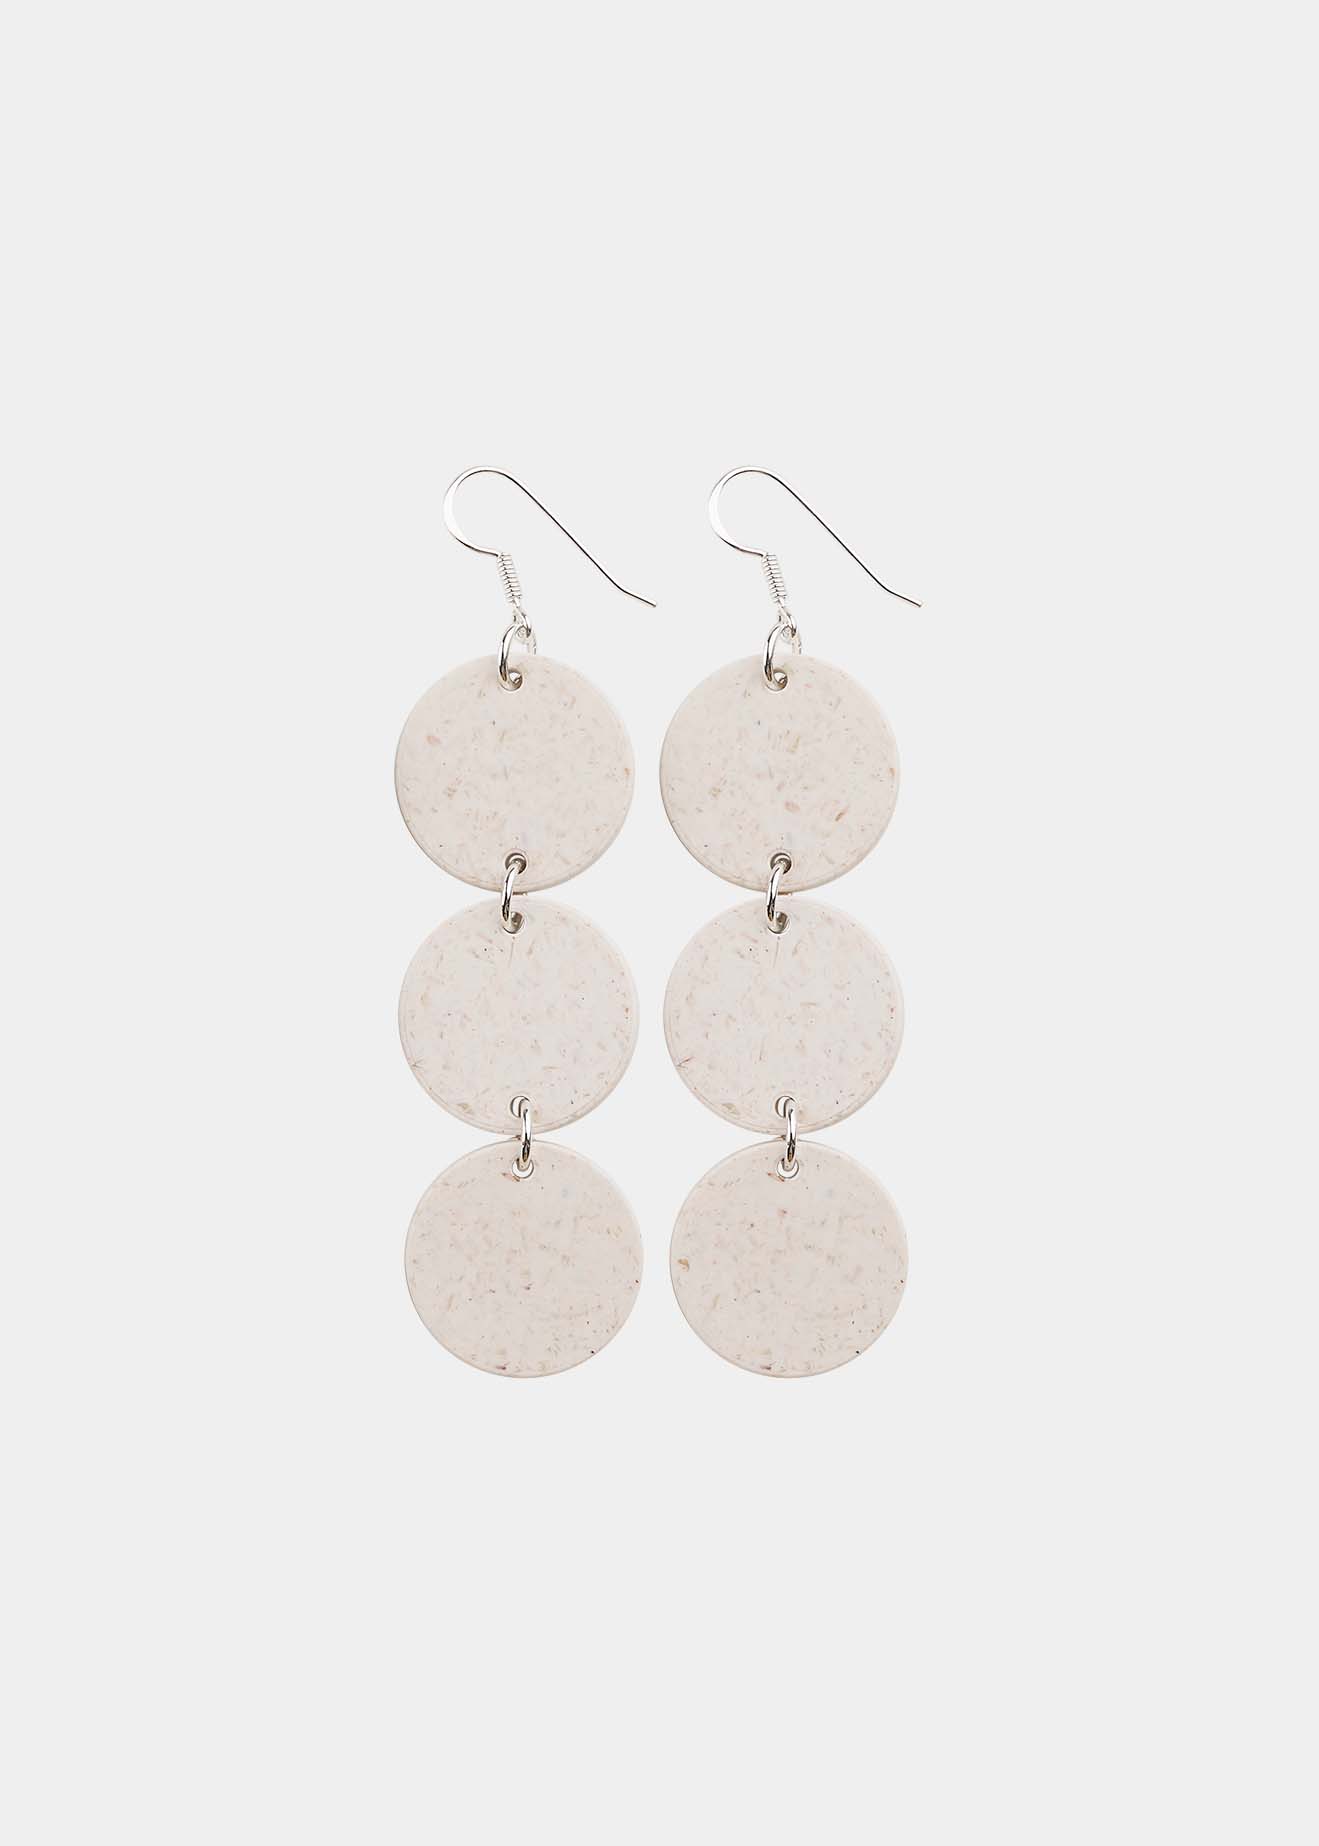 DOTS EARRINGS No.3, First Snow